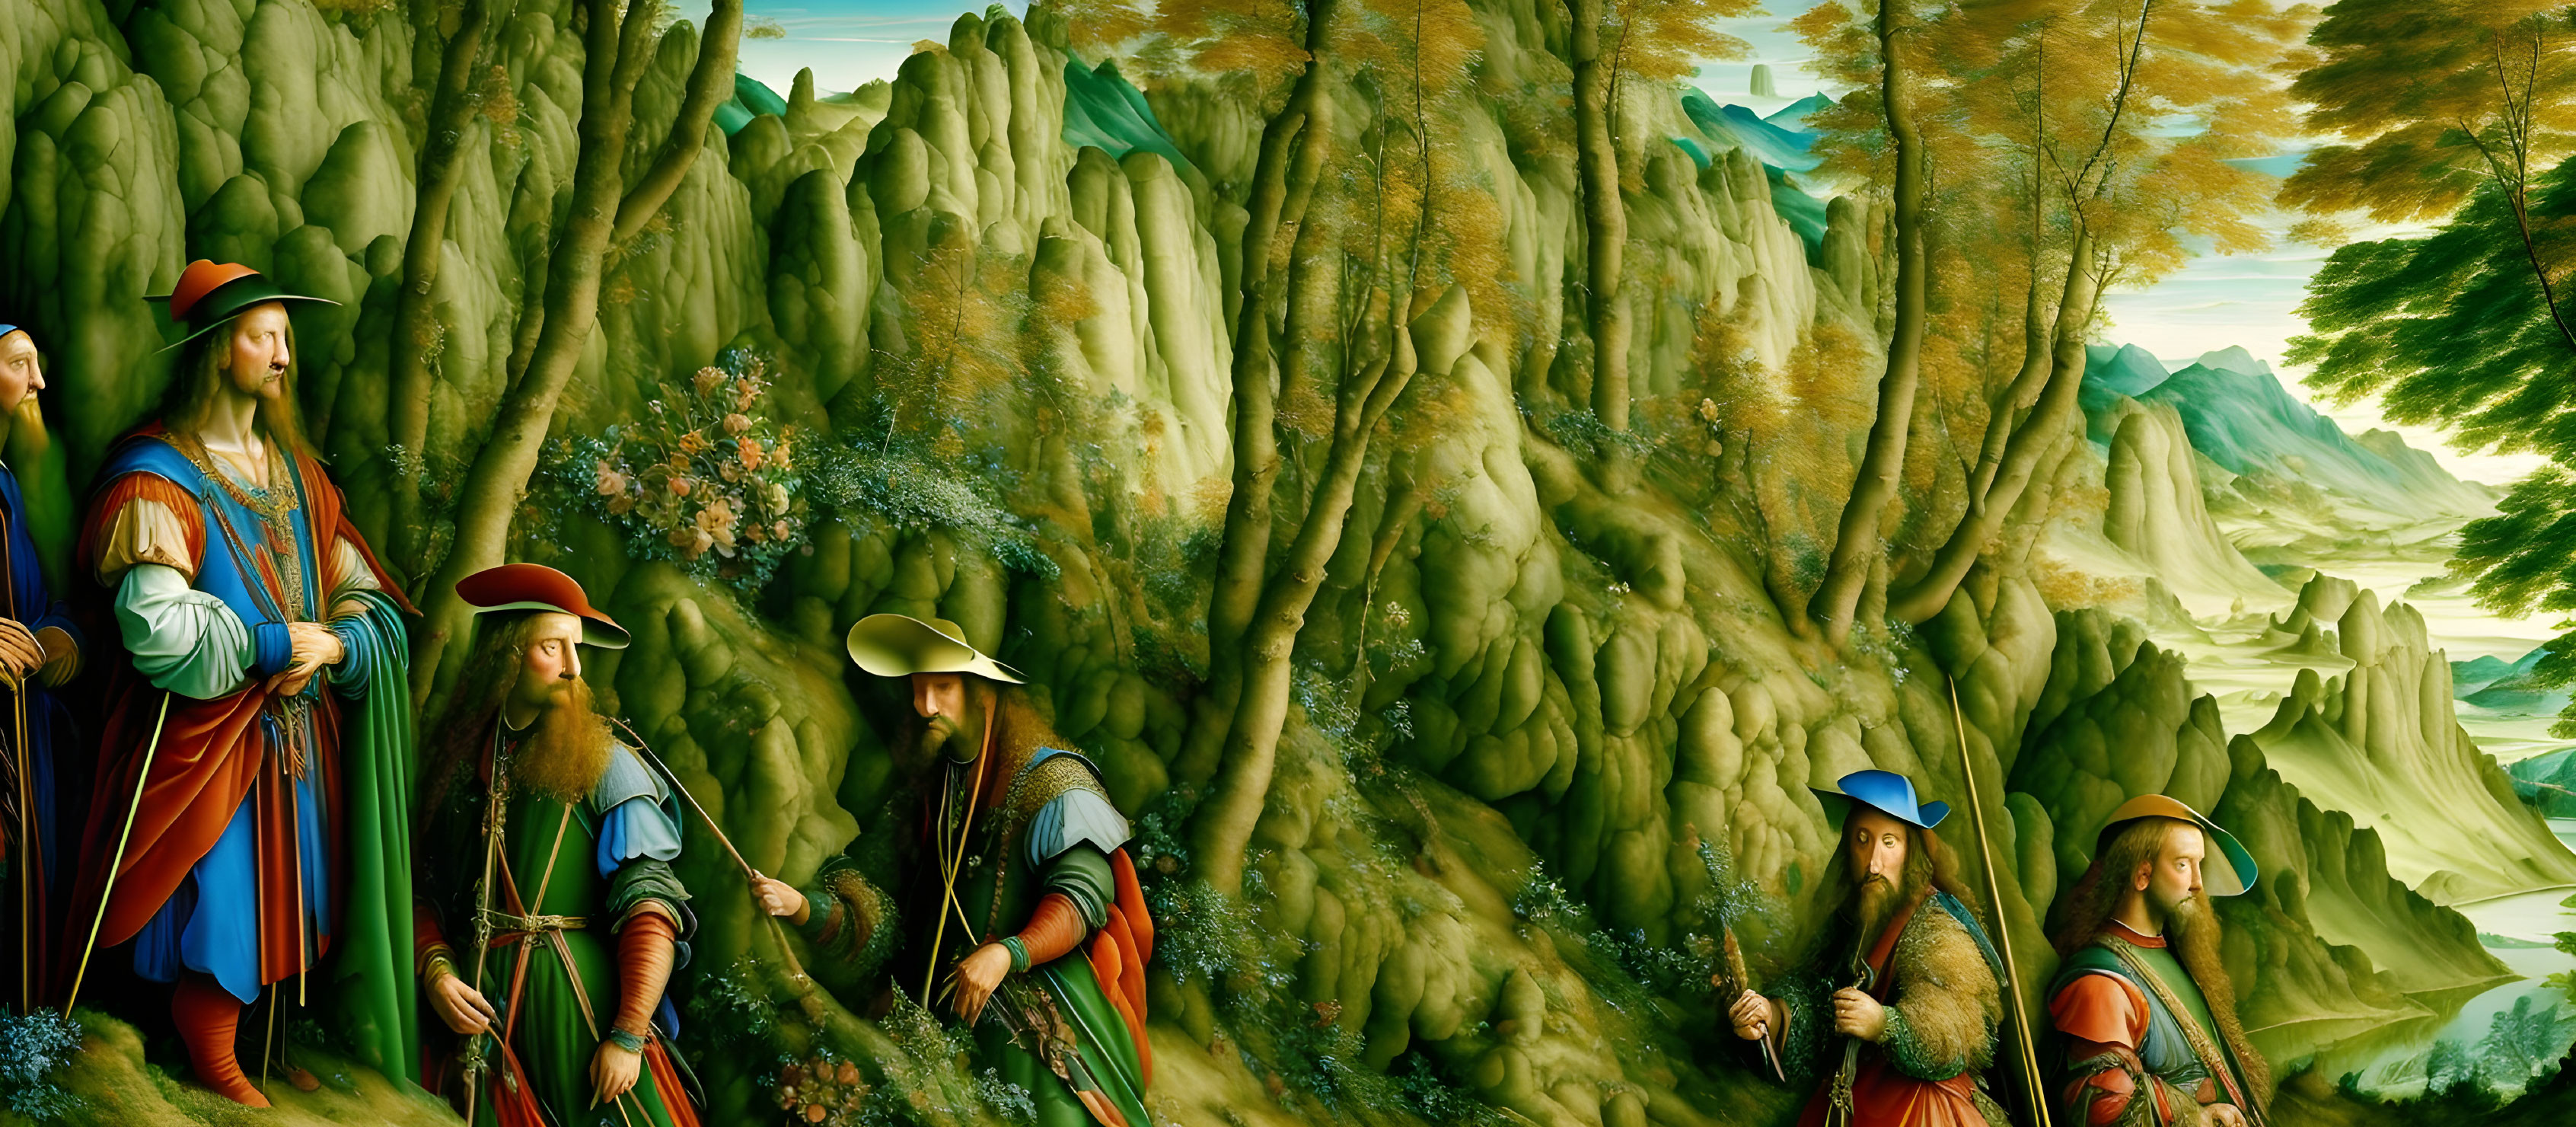 The hunting party in the king’s forest